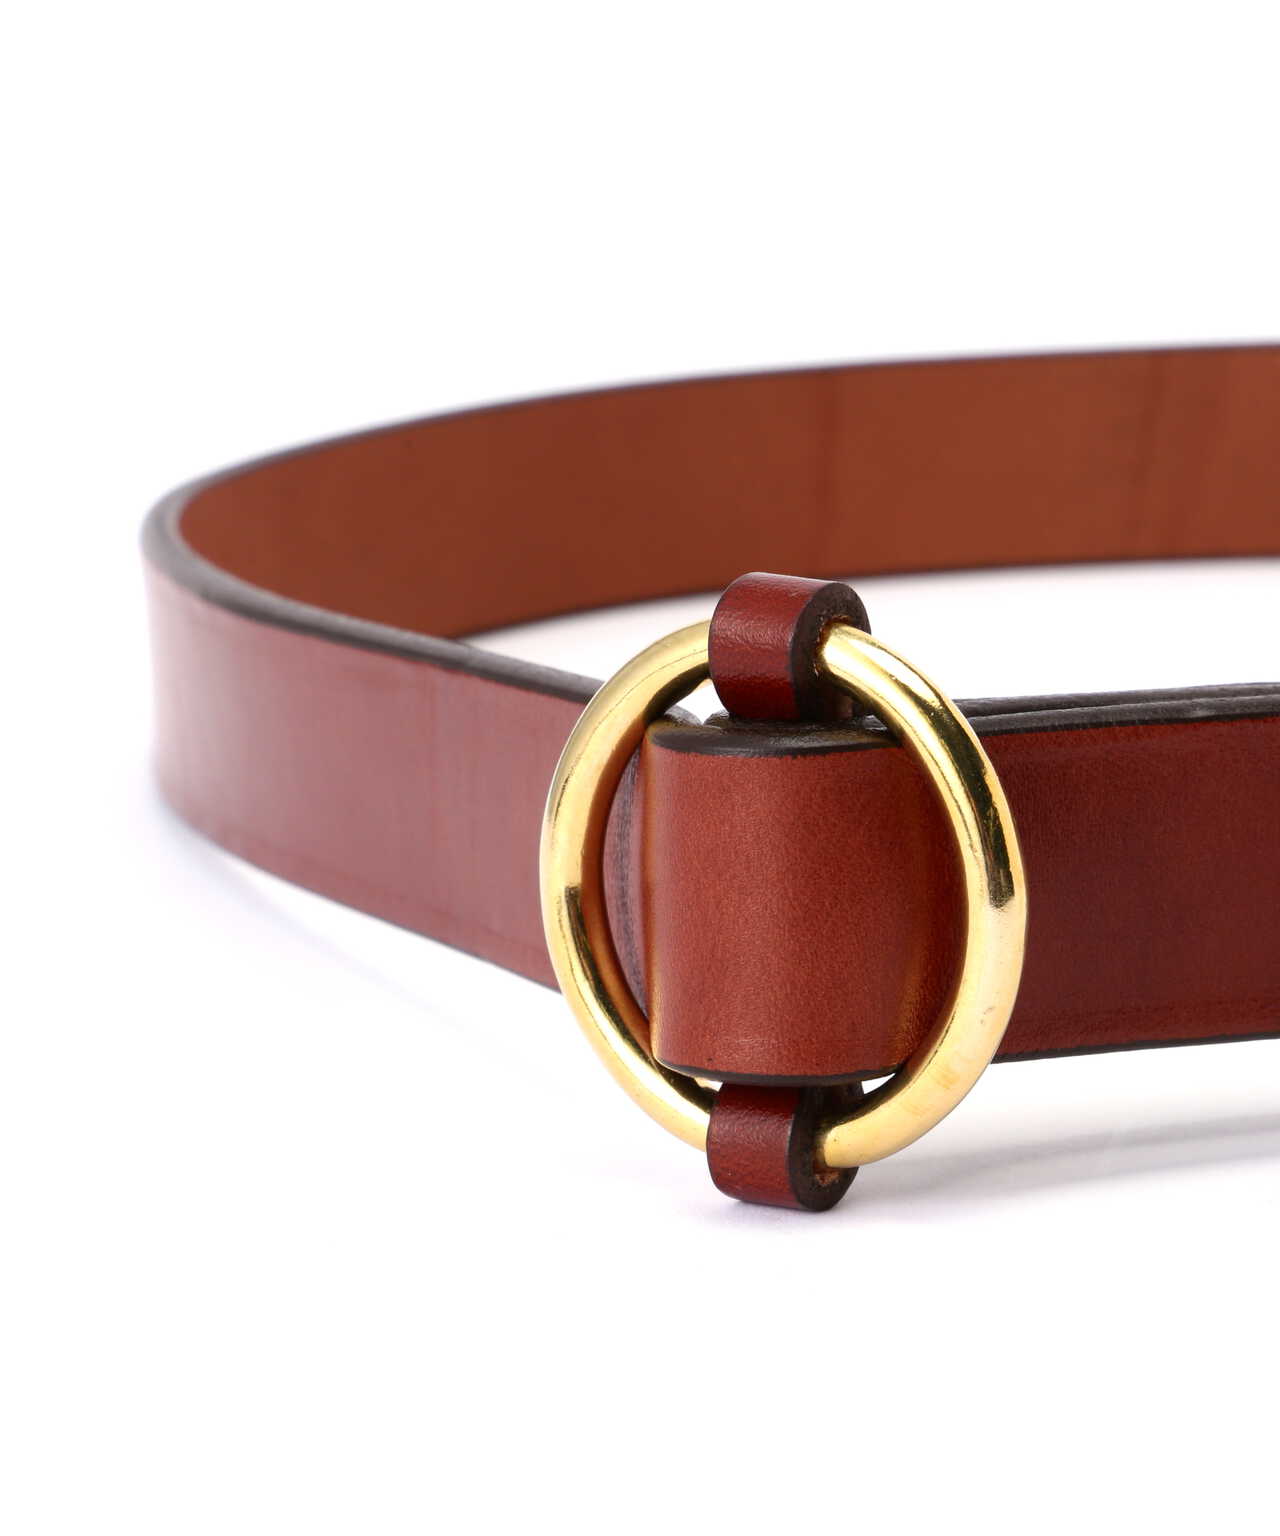 TORY LEATHER(トリーレザー)Strap Belts with Ring Buckle／ビー